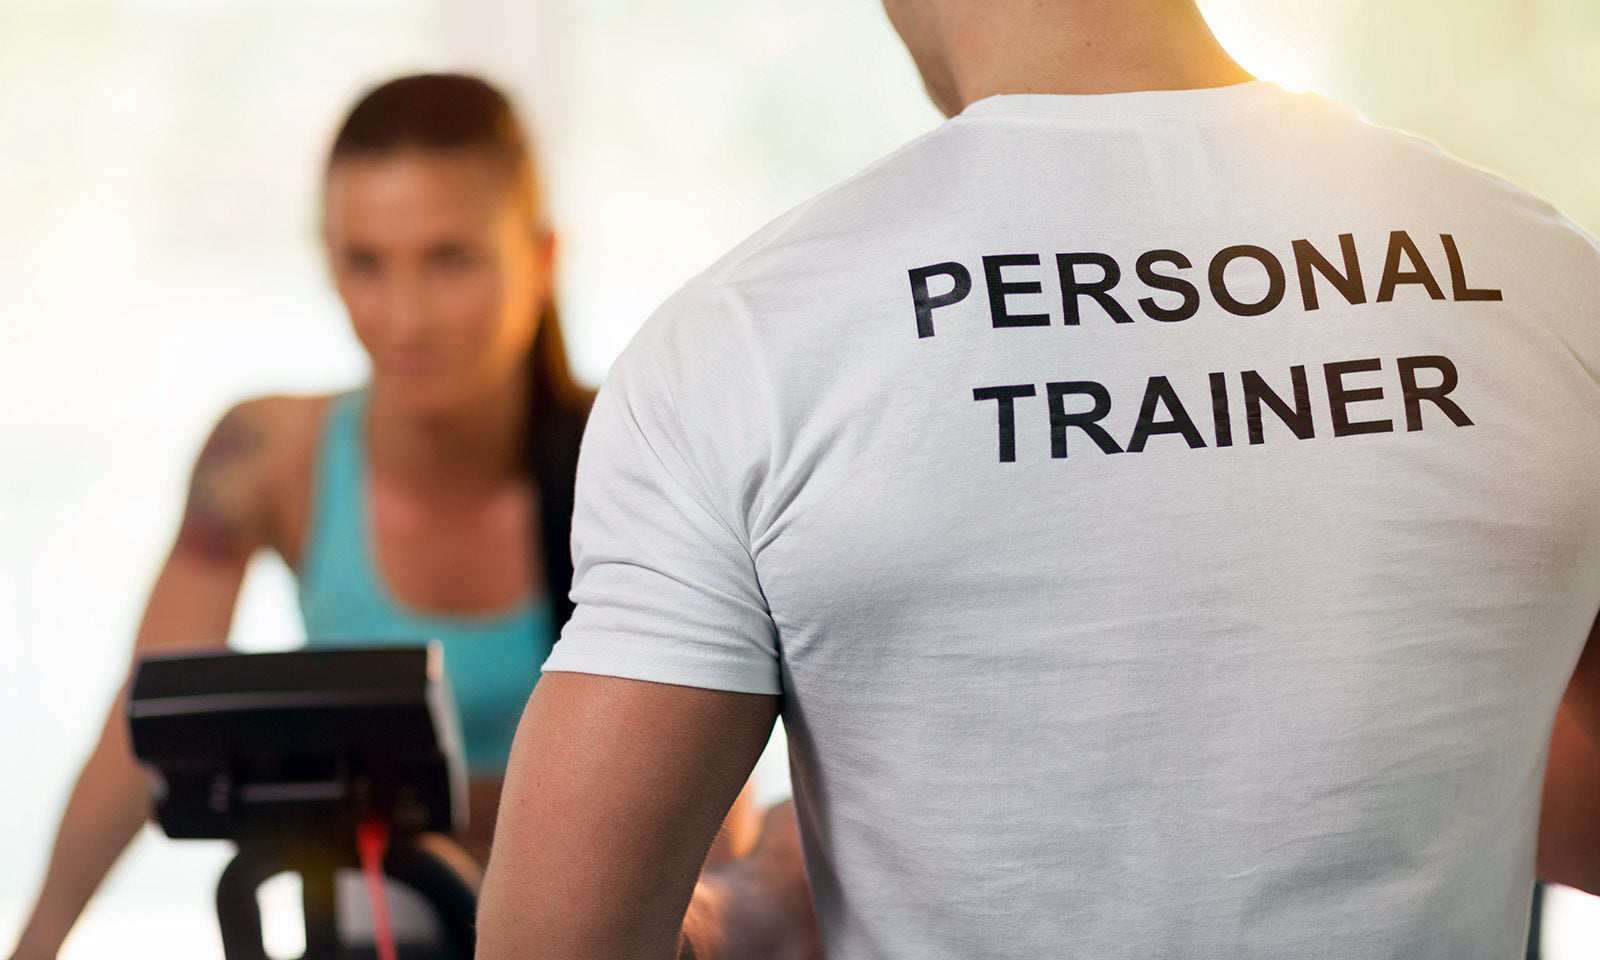 Characteristics and qualities to look for in a personal trainer